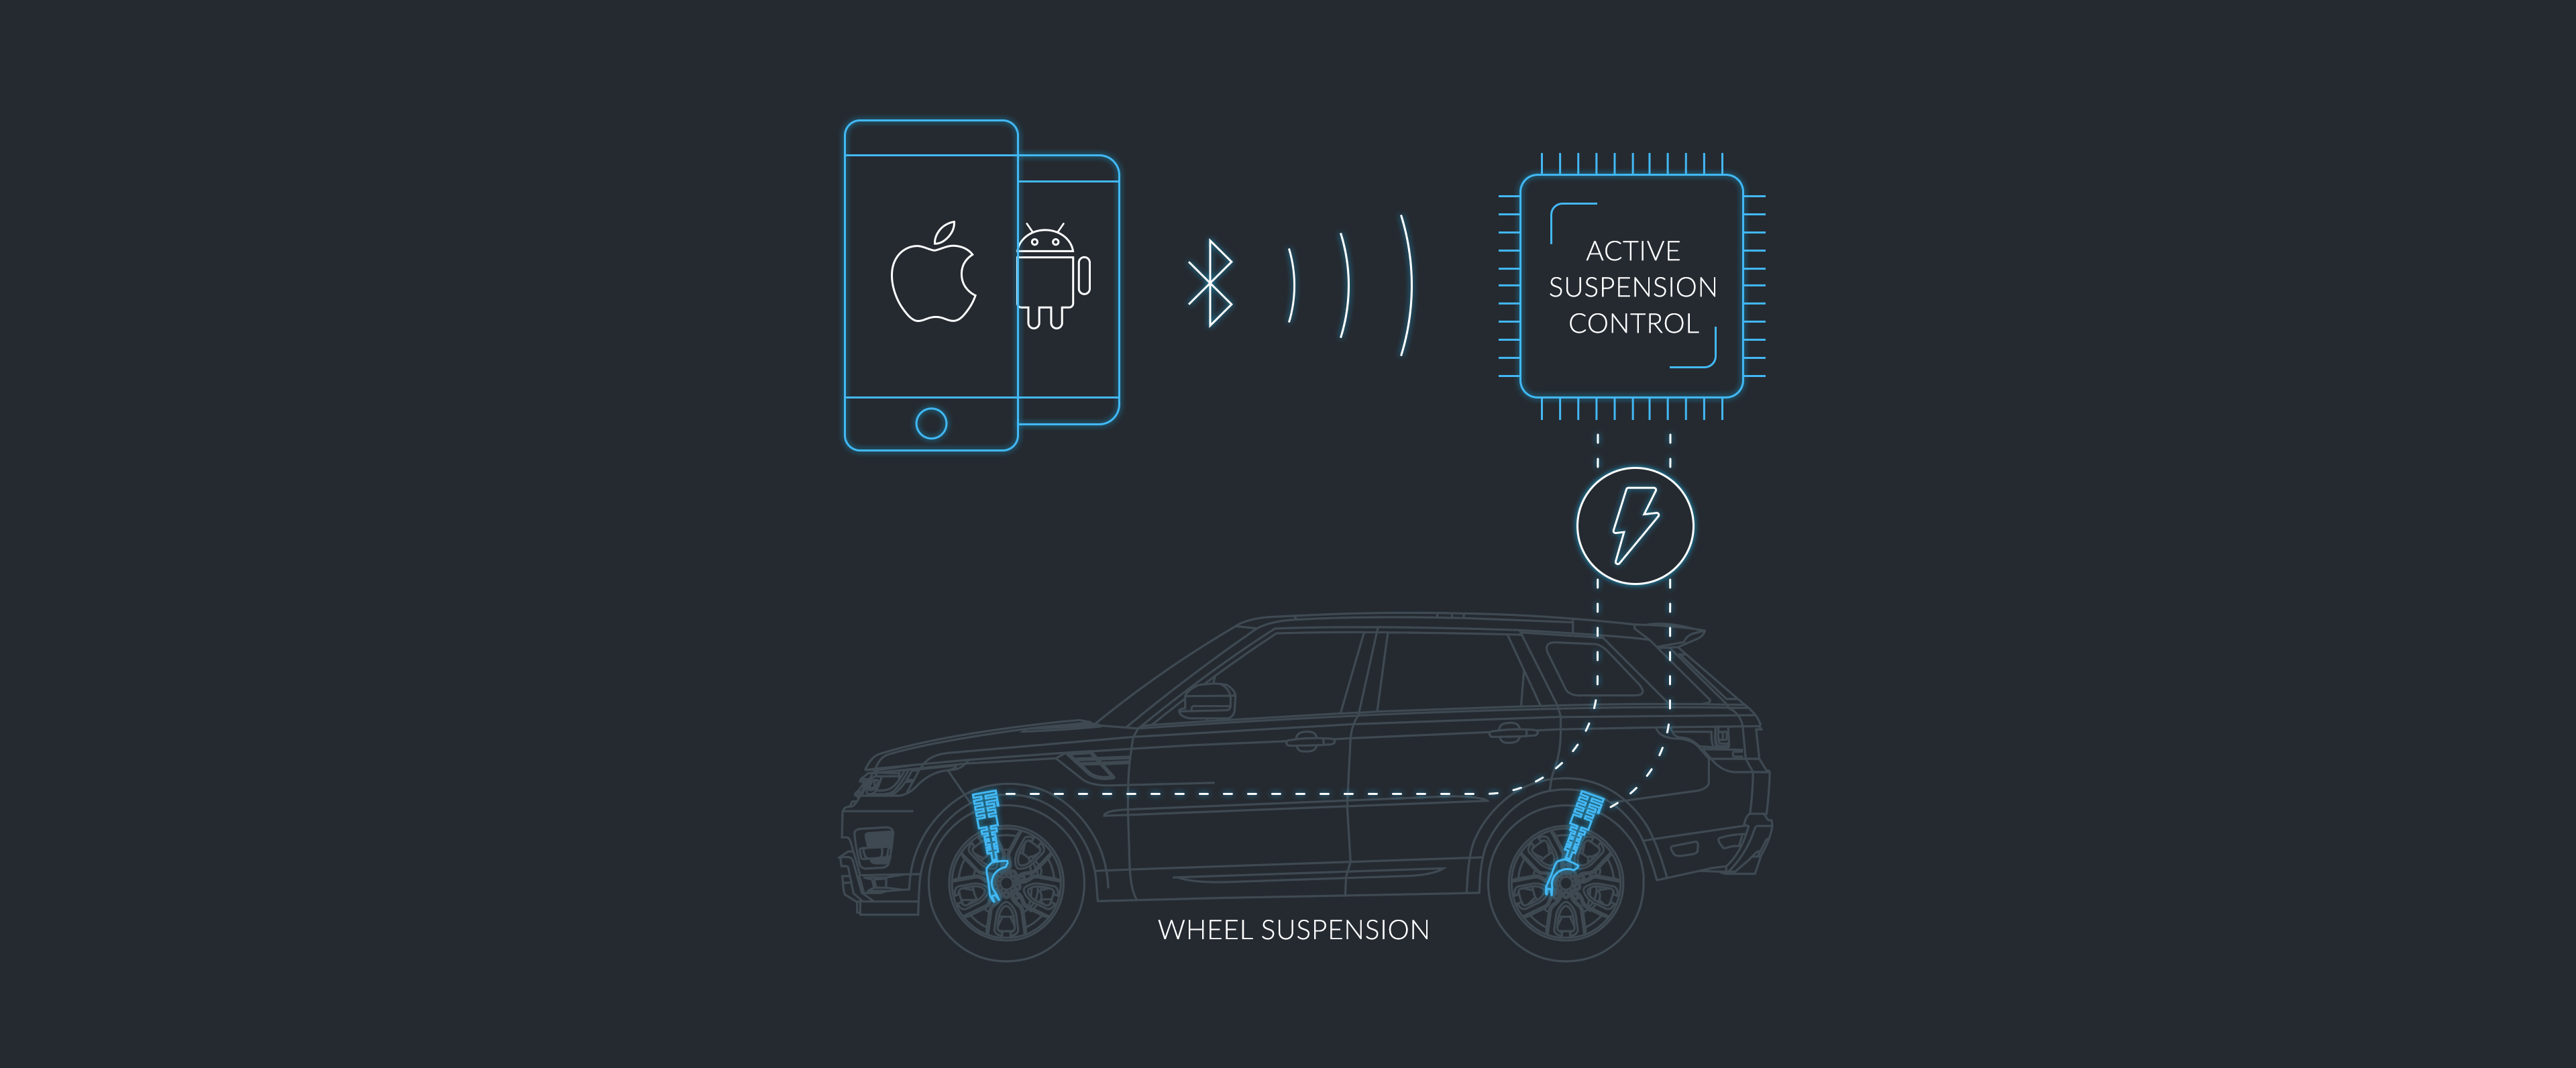 The device allows car owners to control wheel suspension via Bluetooth Low Energy connection